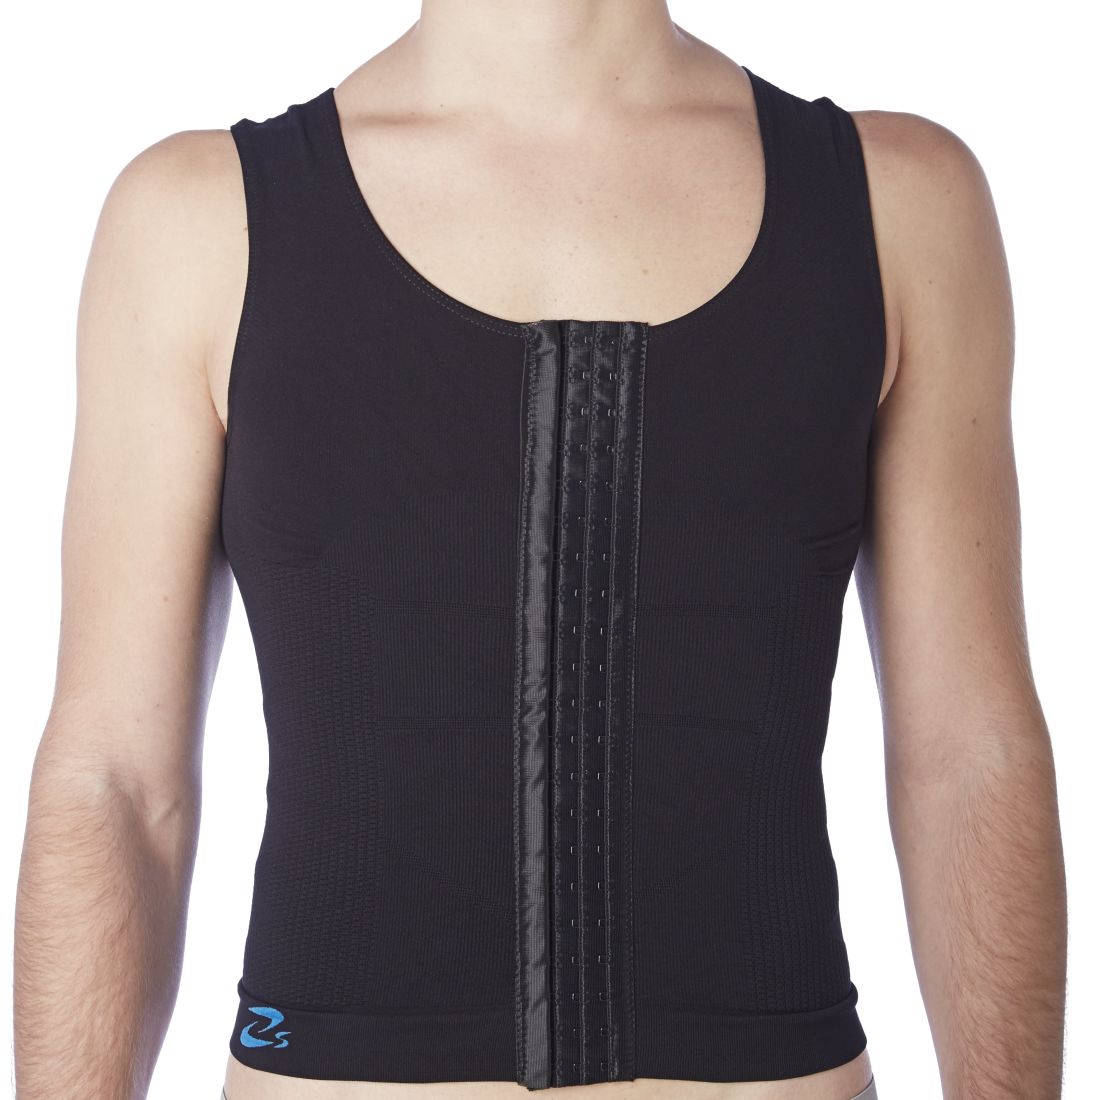 Man Corset with hooks made as sleeveless tank top to support